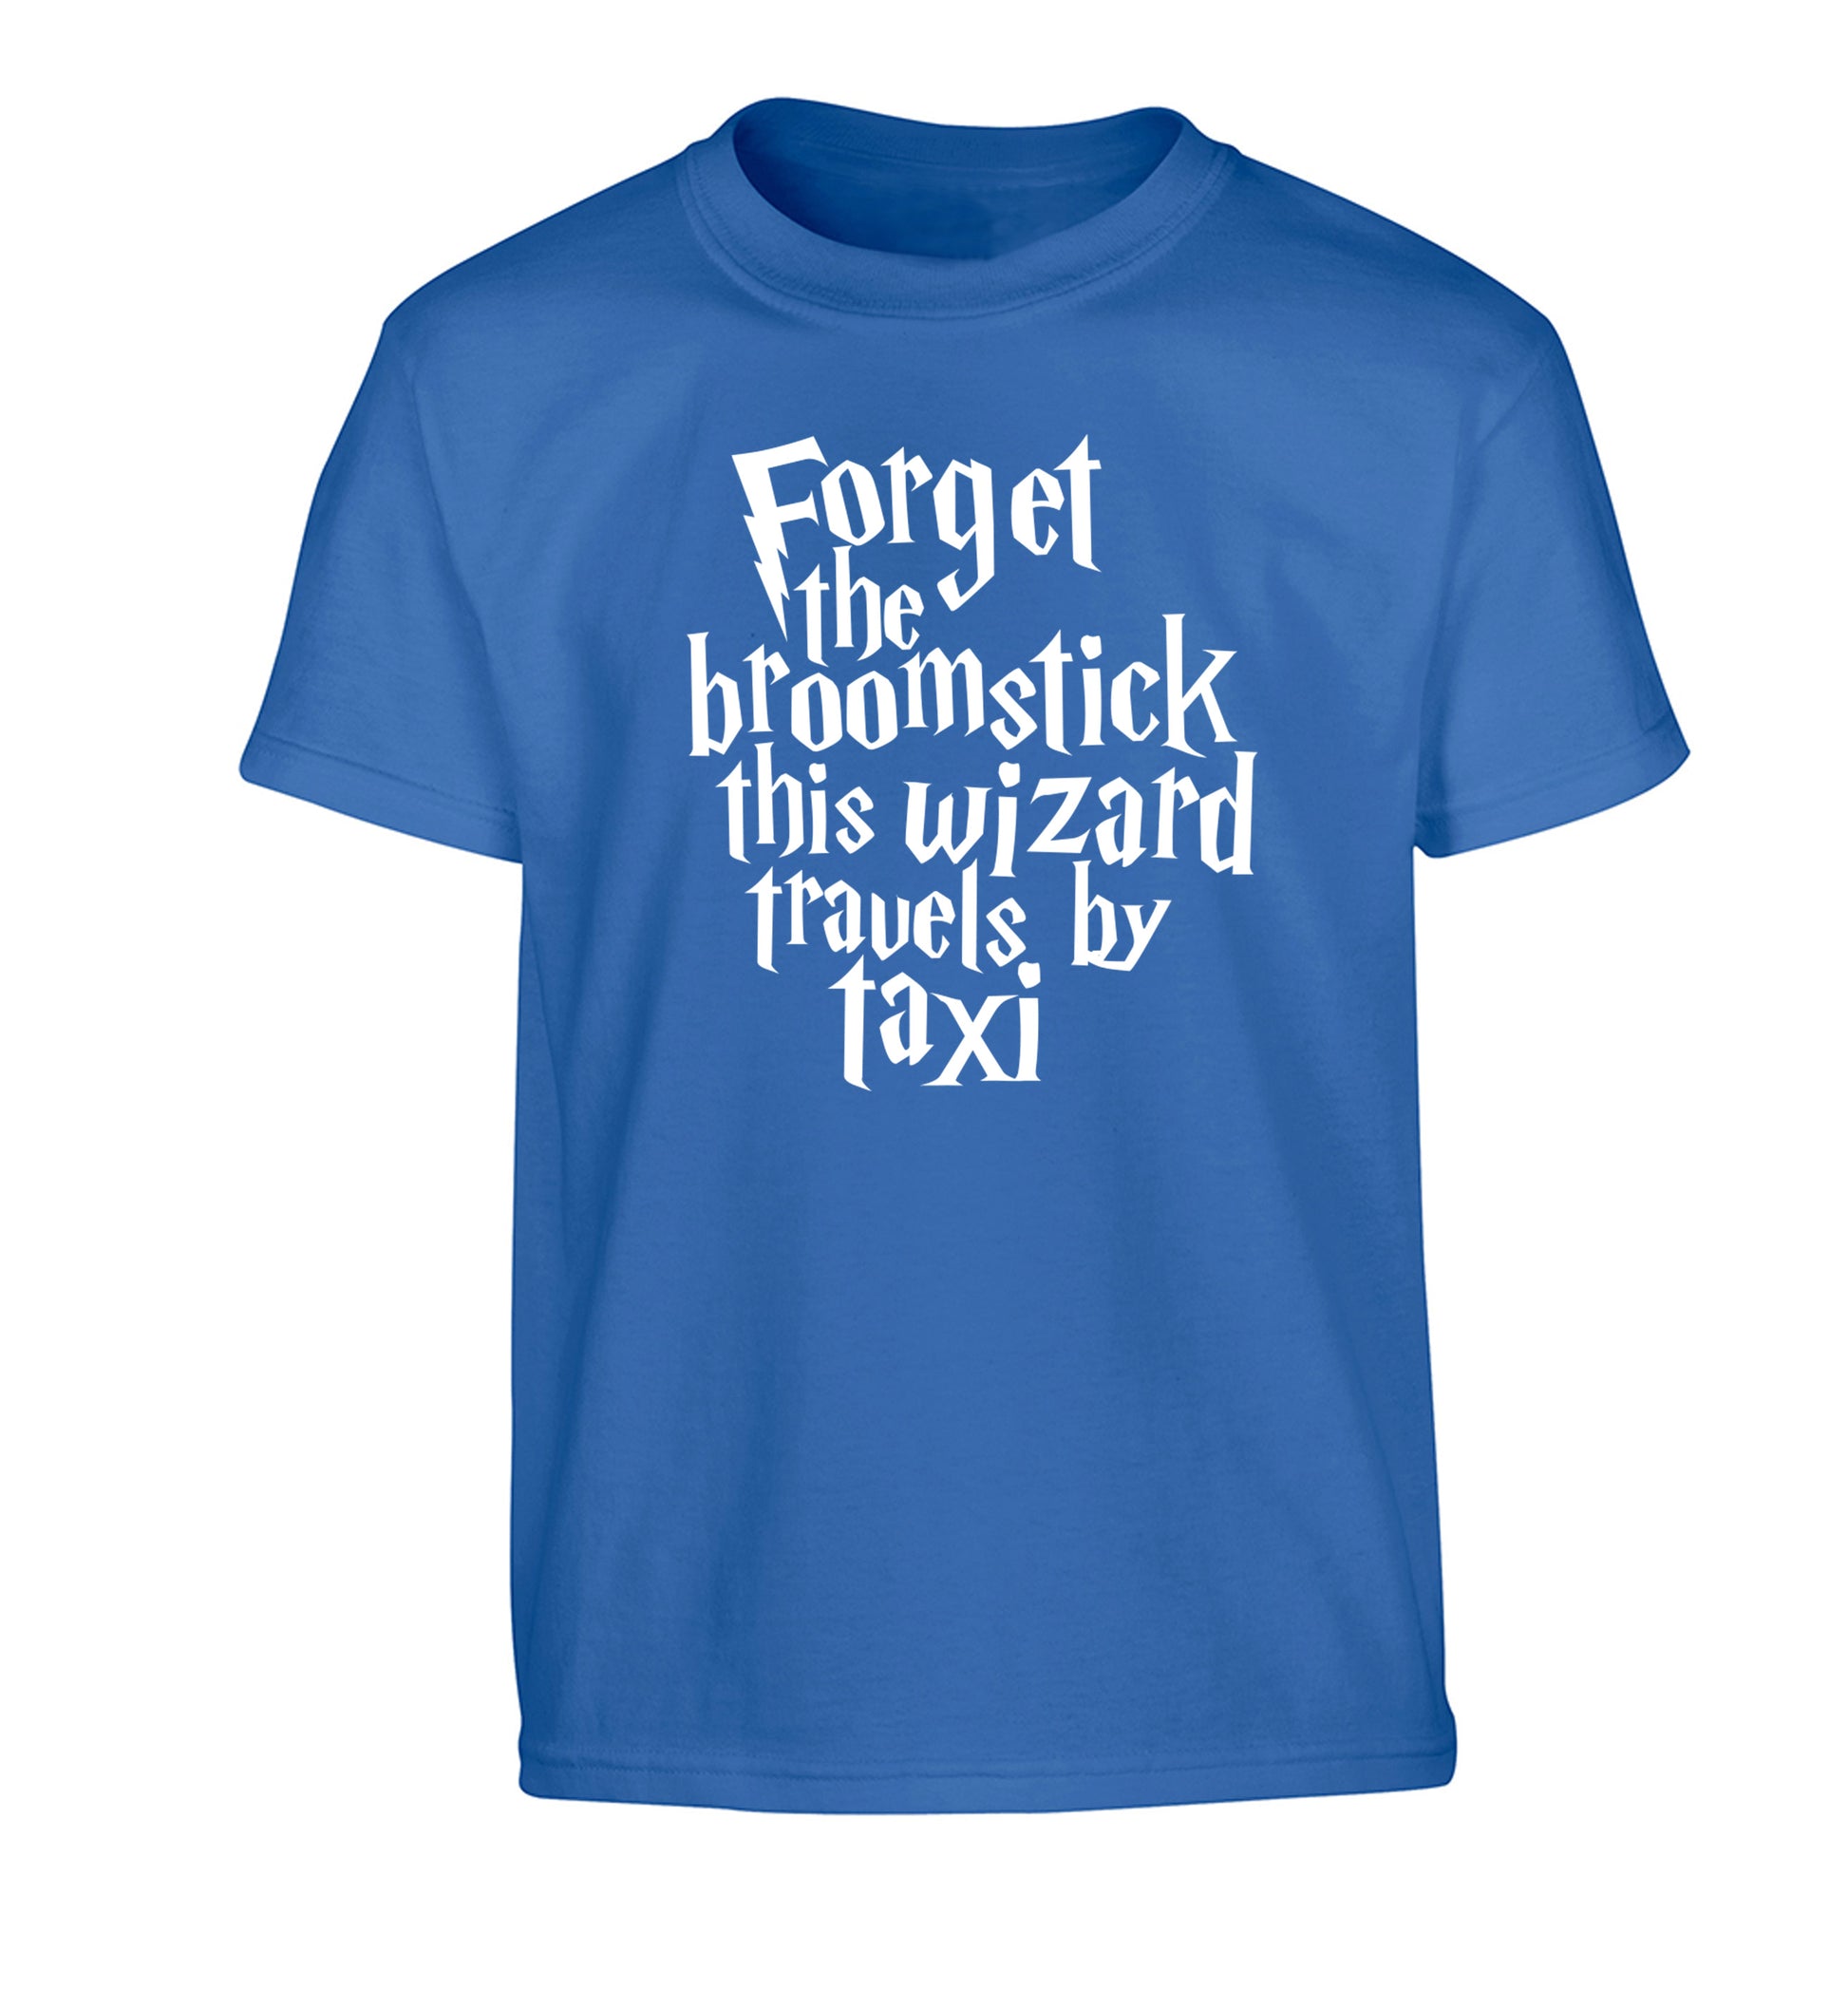 Forget the broomstick this wizard travels by taxi Children's blue Tshirt 12-14 Years